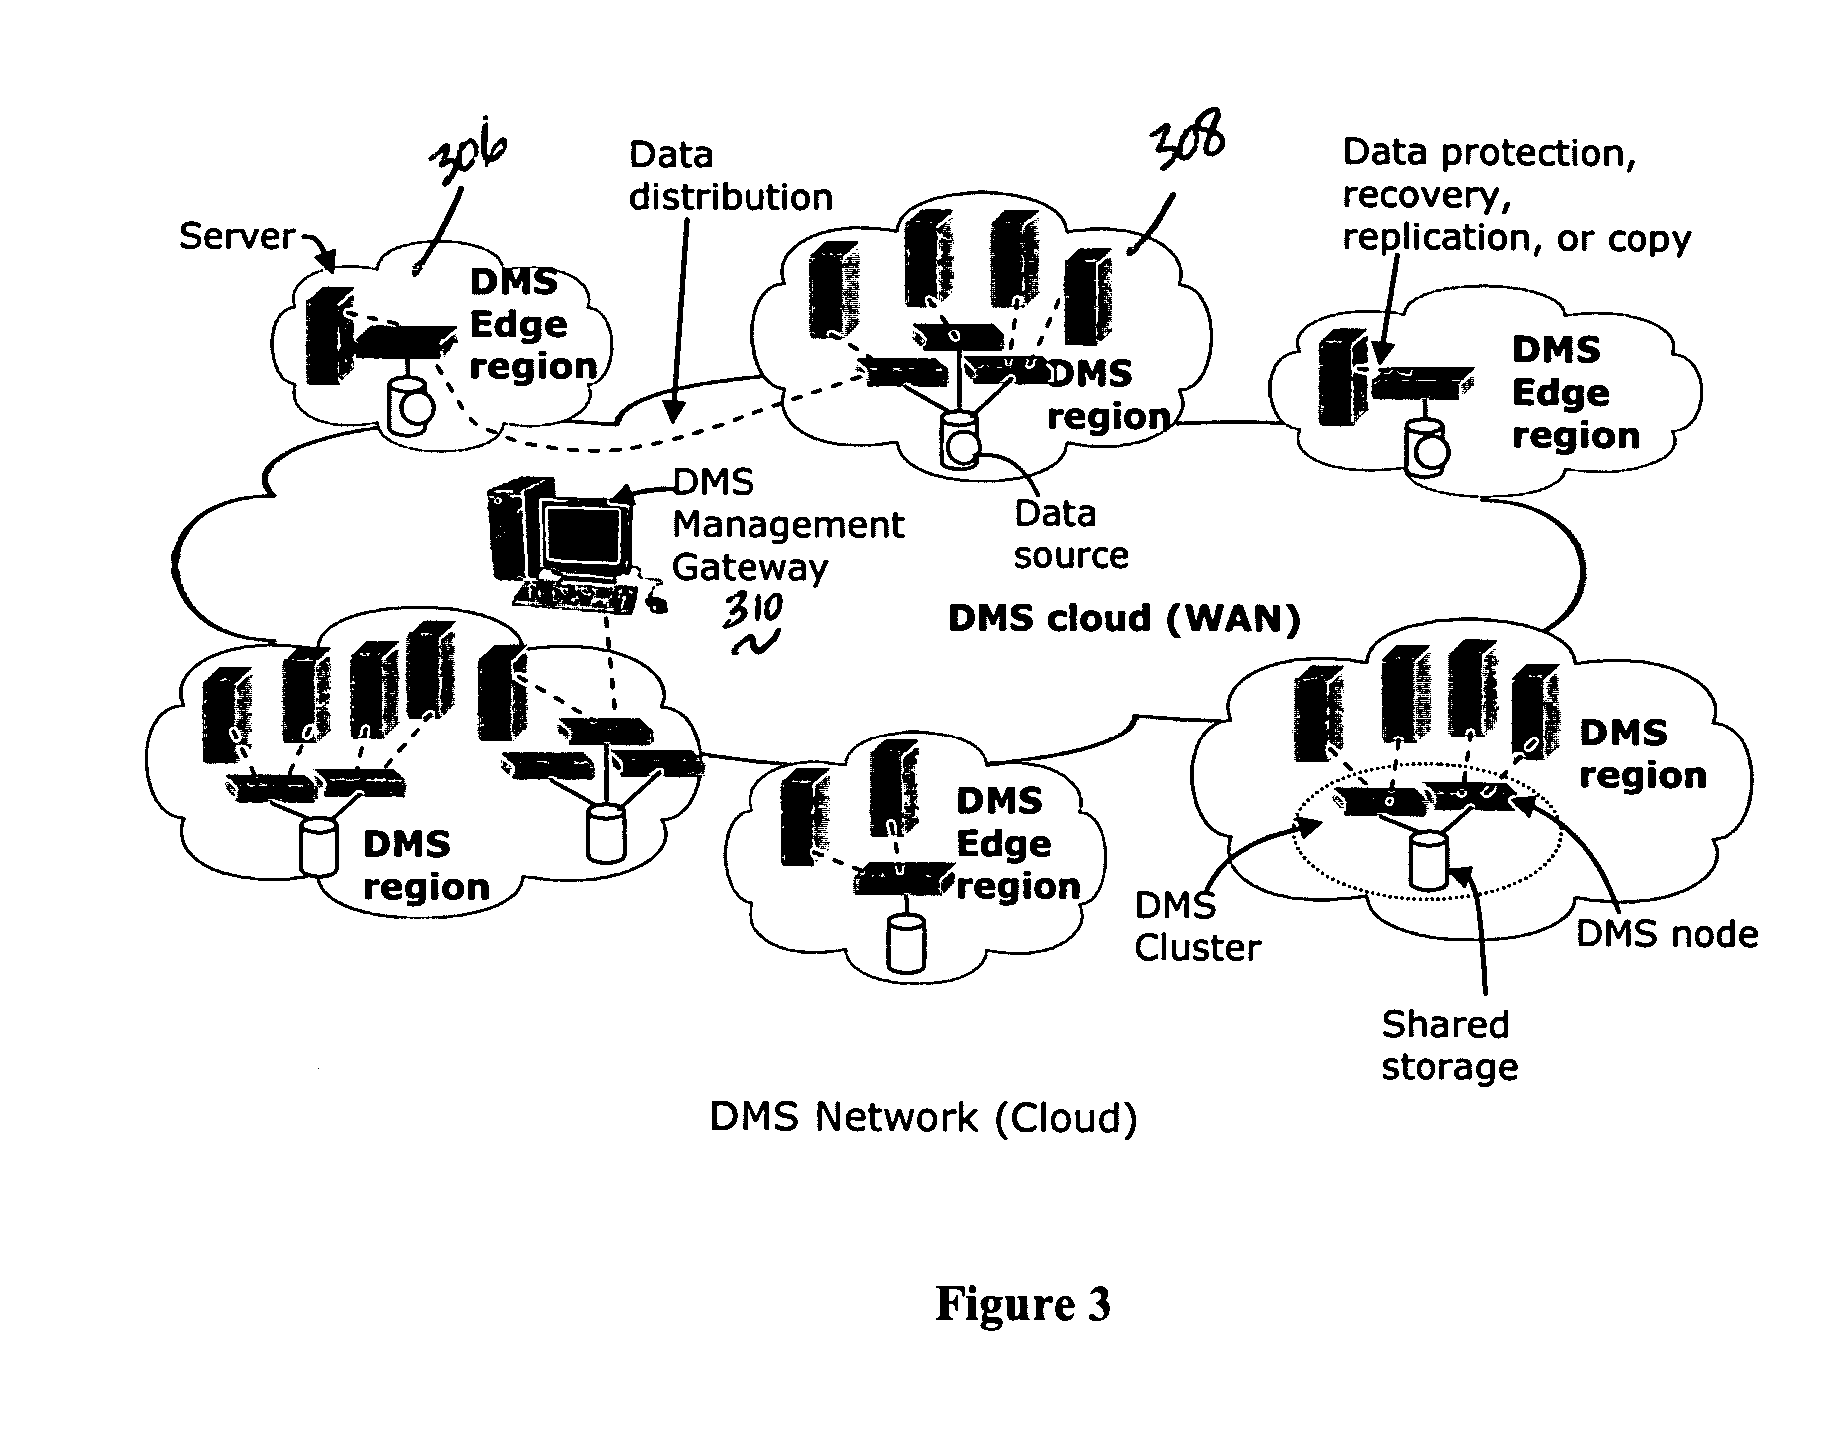 System for moving real-time data events across a plurality of devices in a network for simultaneous data protection, replication, and access services